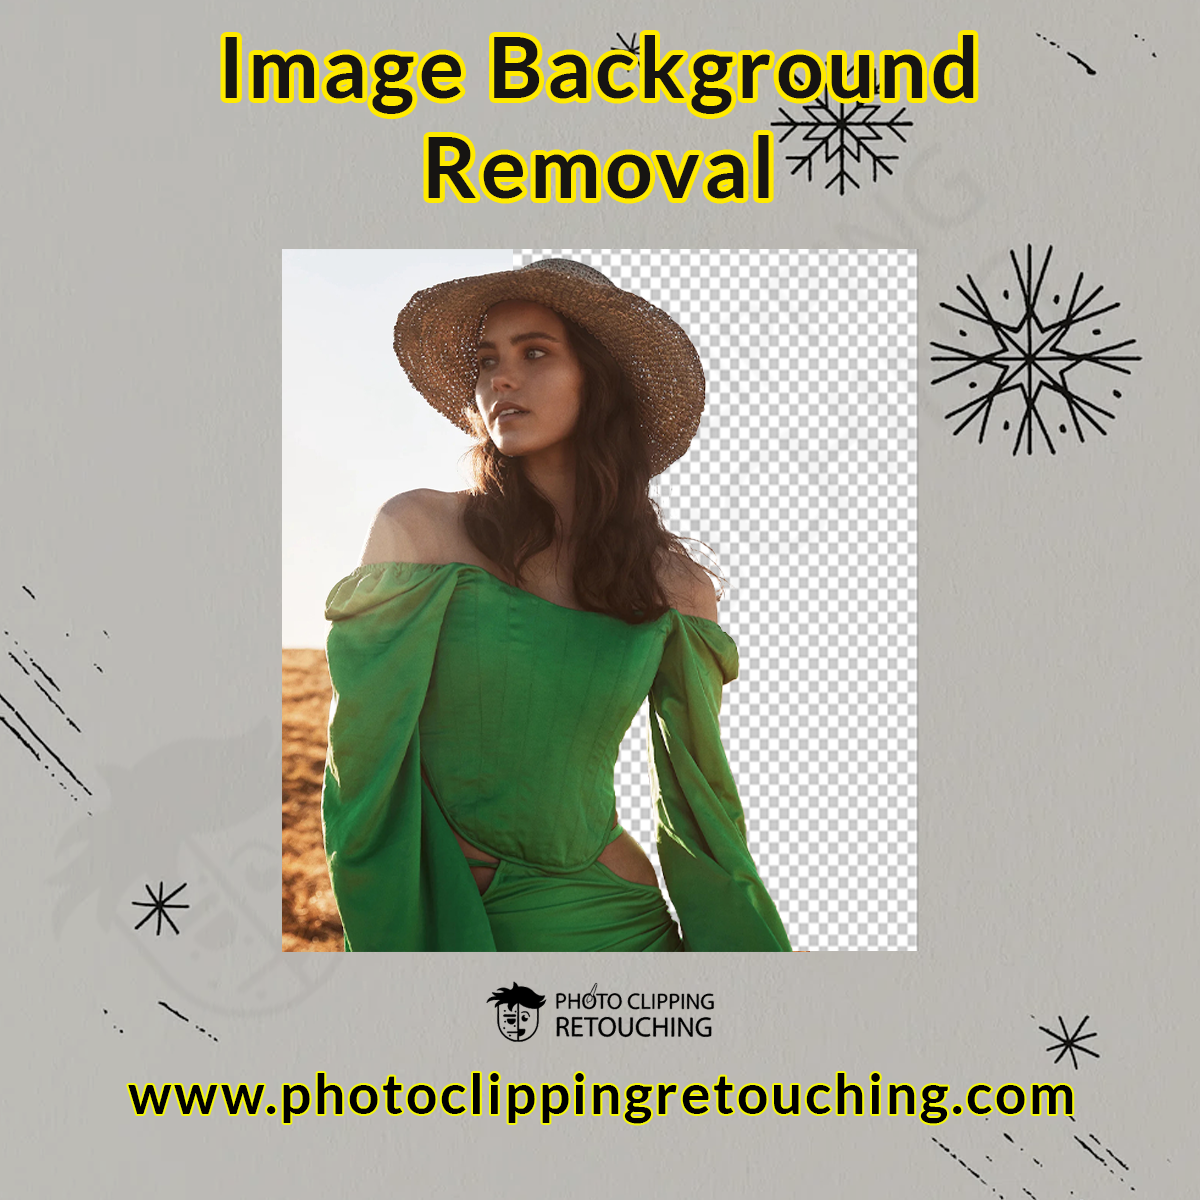 photoediting EditingServices graphicdesign backgroundremoval CleanBackground creativeediting digitalmakeover